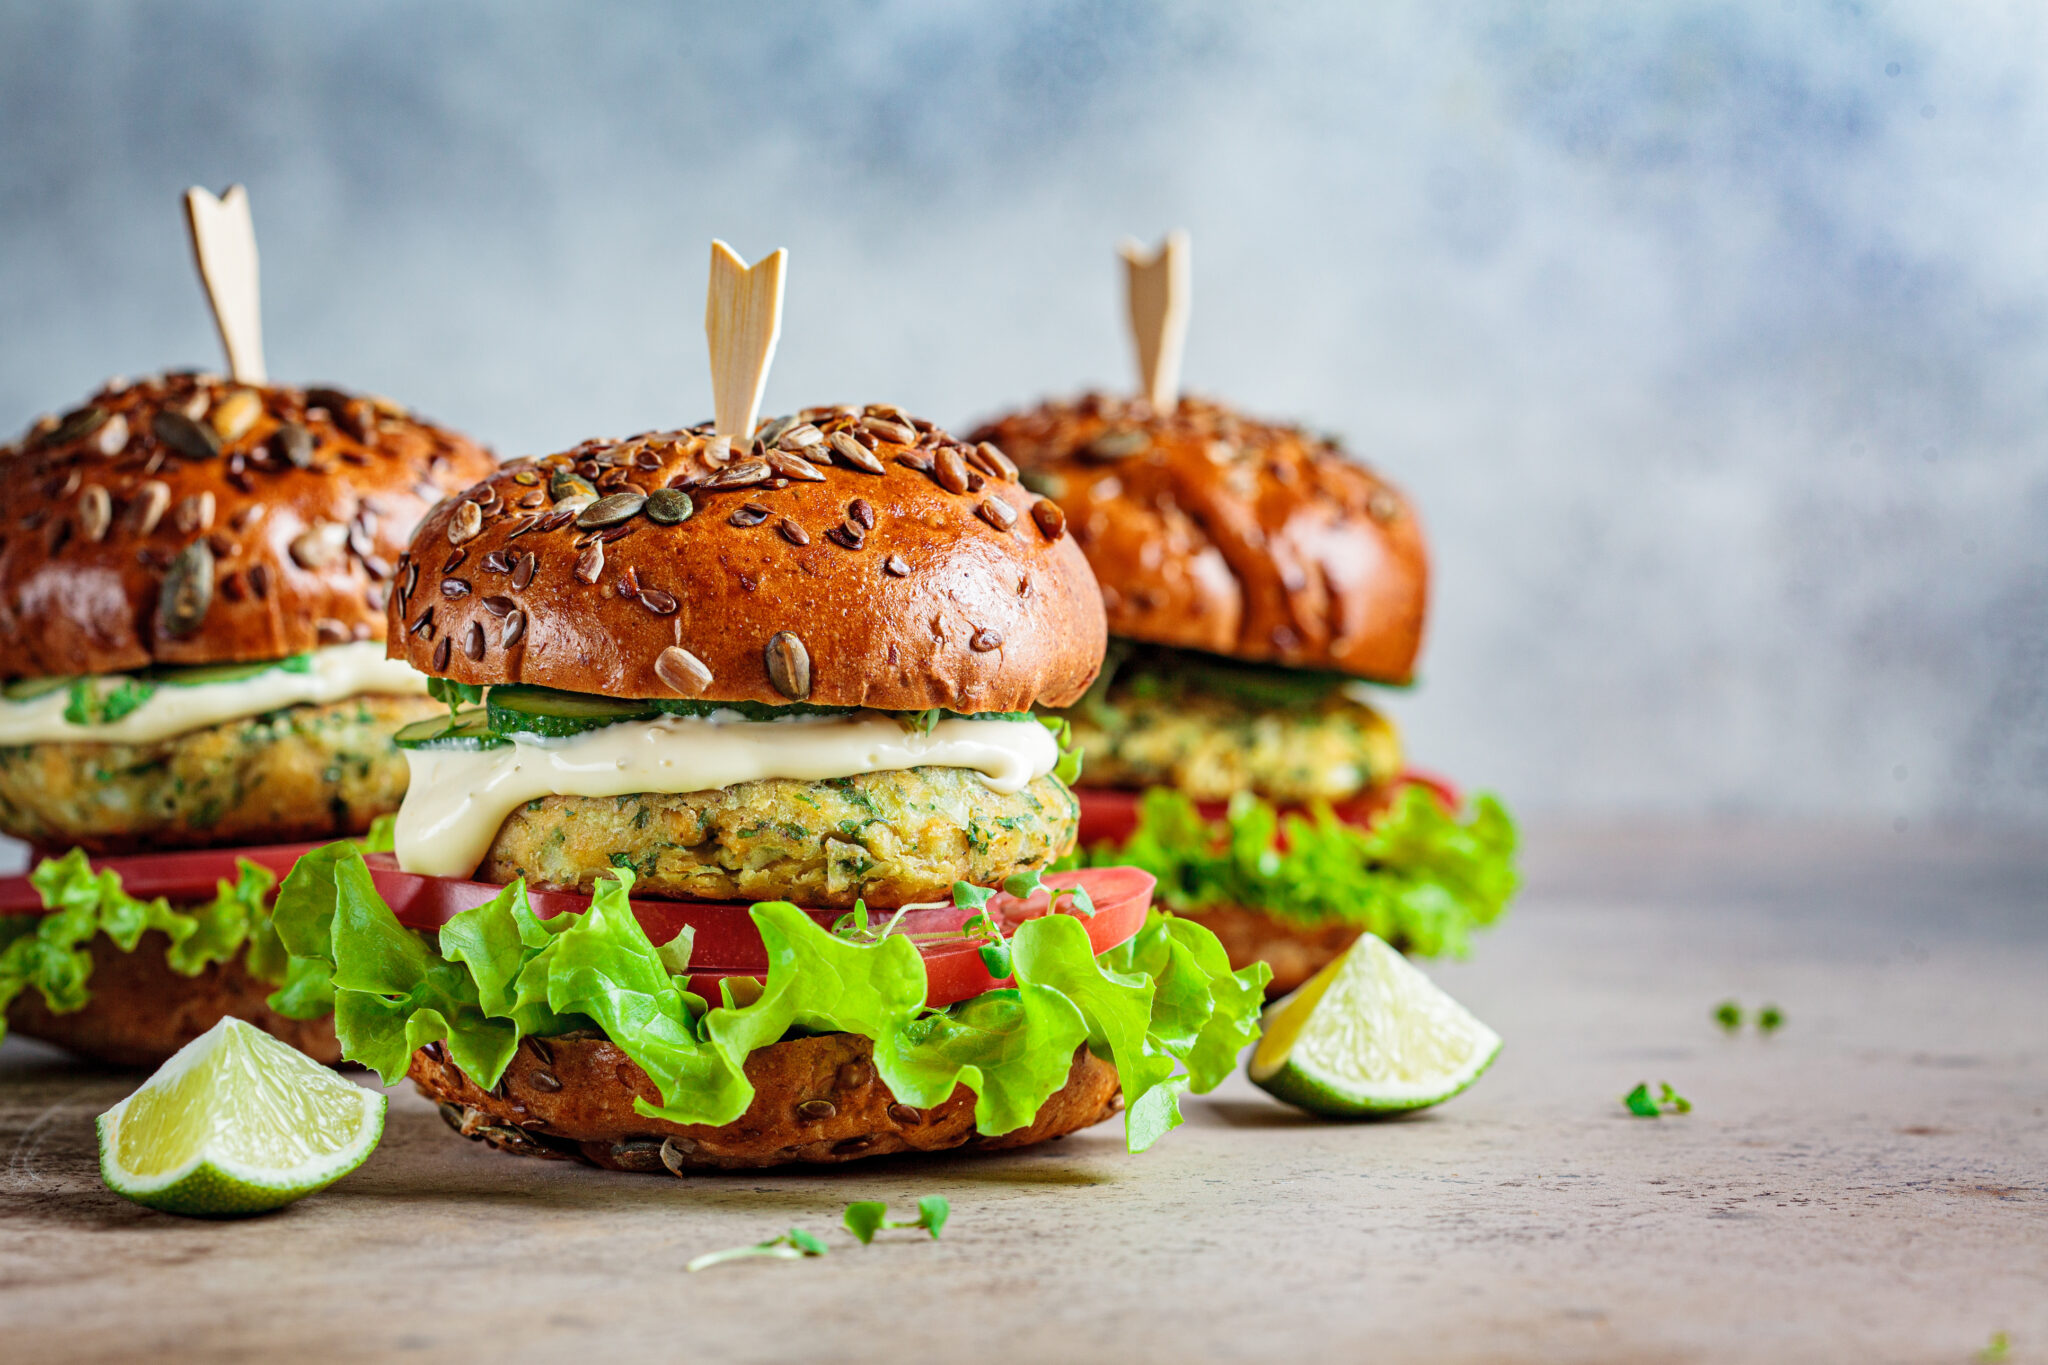 Image features: Vegan falafel burgers with vegetables and sauce. Plant-based food concept.